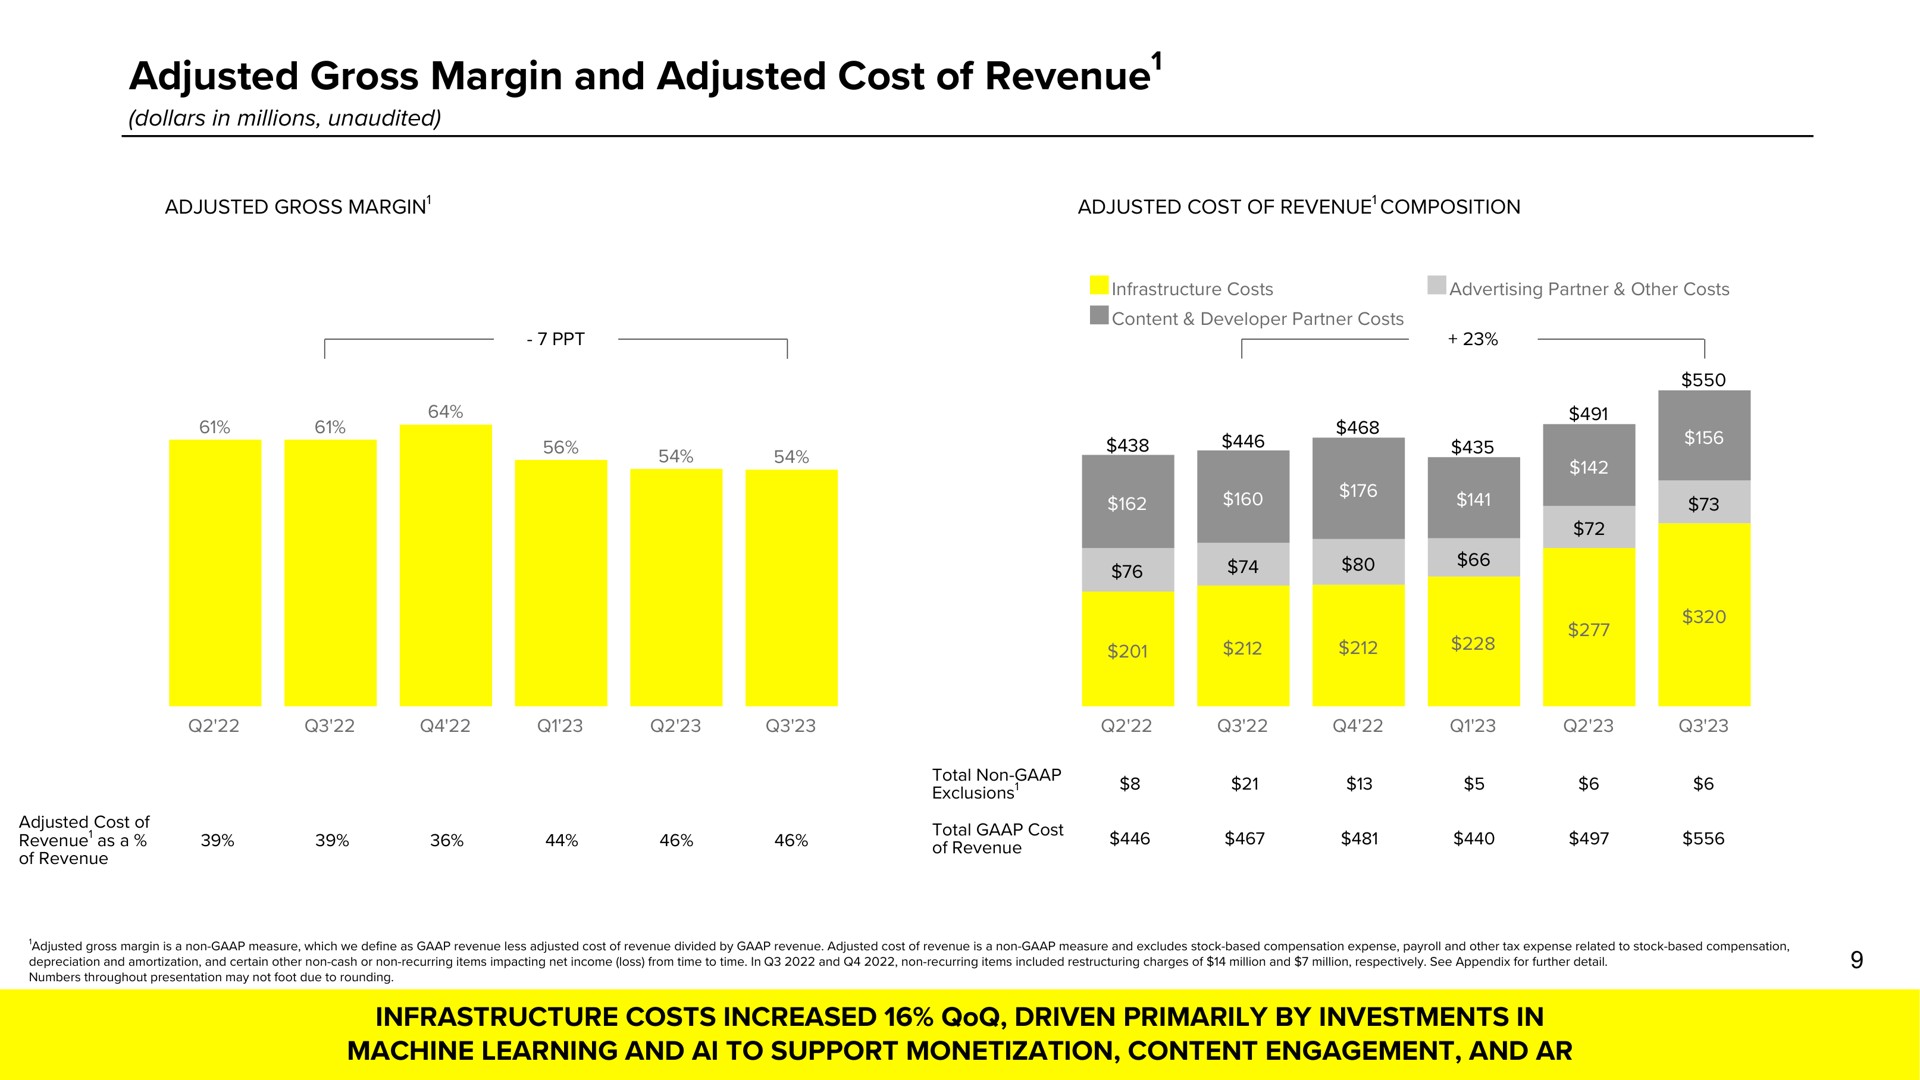 adjusted gross margin and adjusted cost of revenue revenue bee a era at a infrastructure costs increased driven primarily by investments in machine learning to support monetization content engagement | Snap Inc